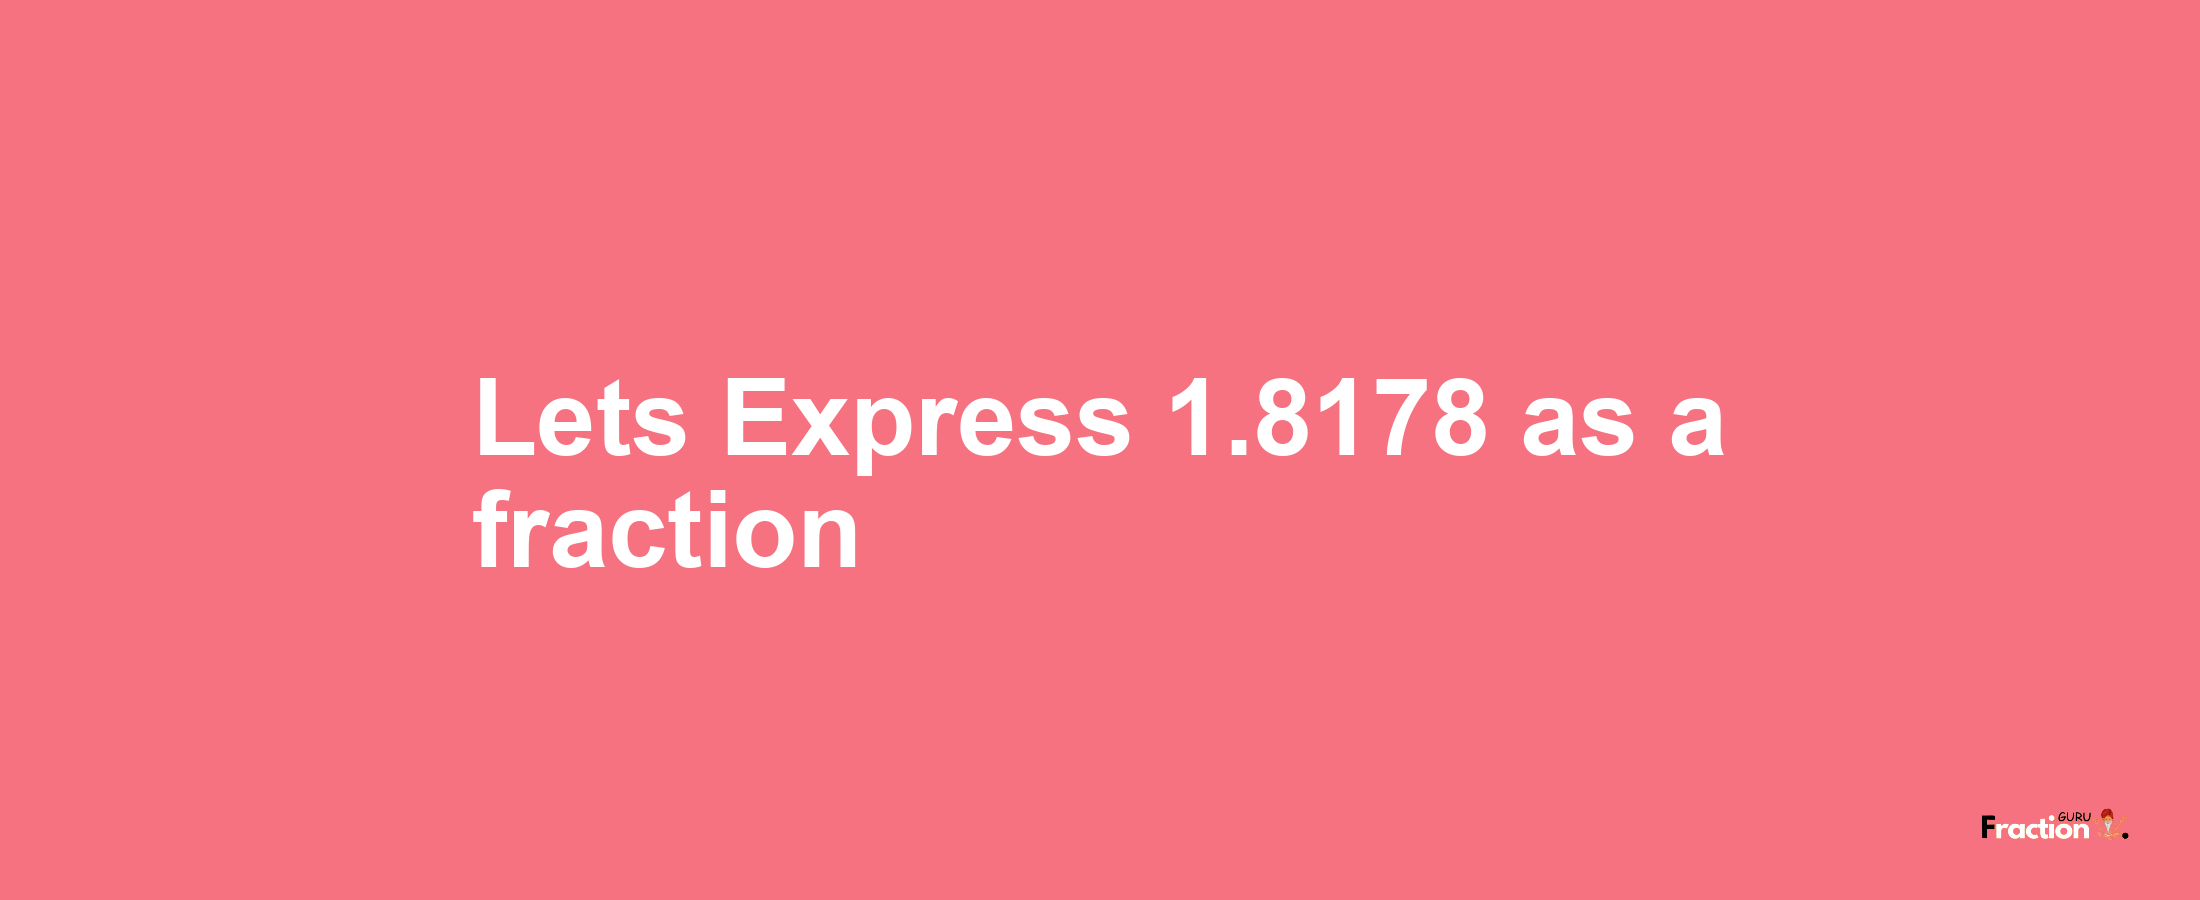 Lets Express 1.8178 as afraction